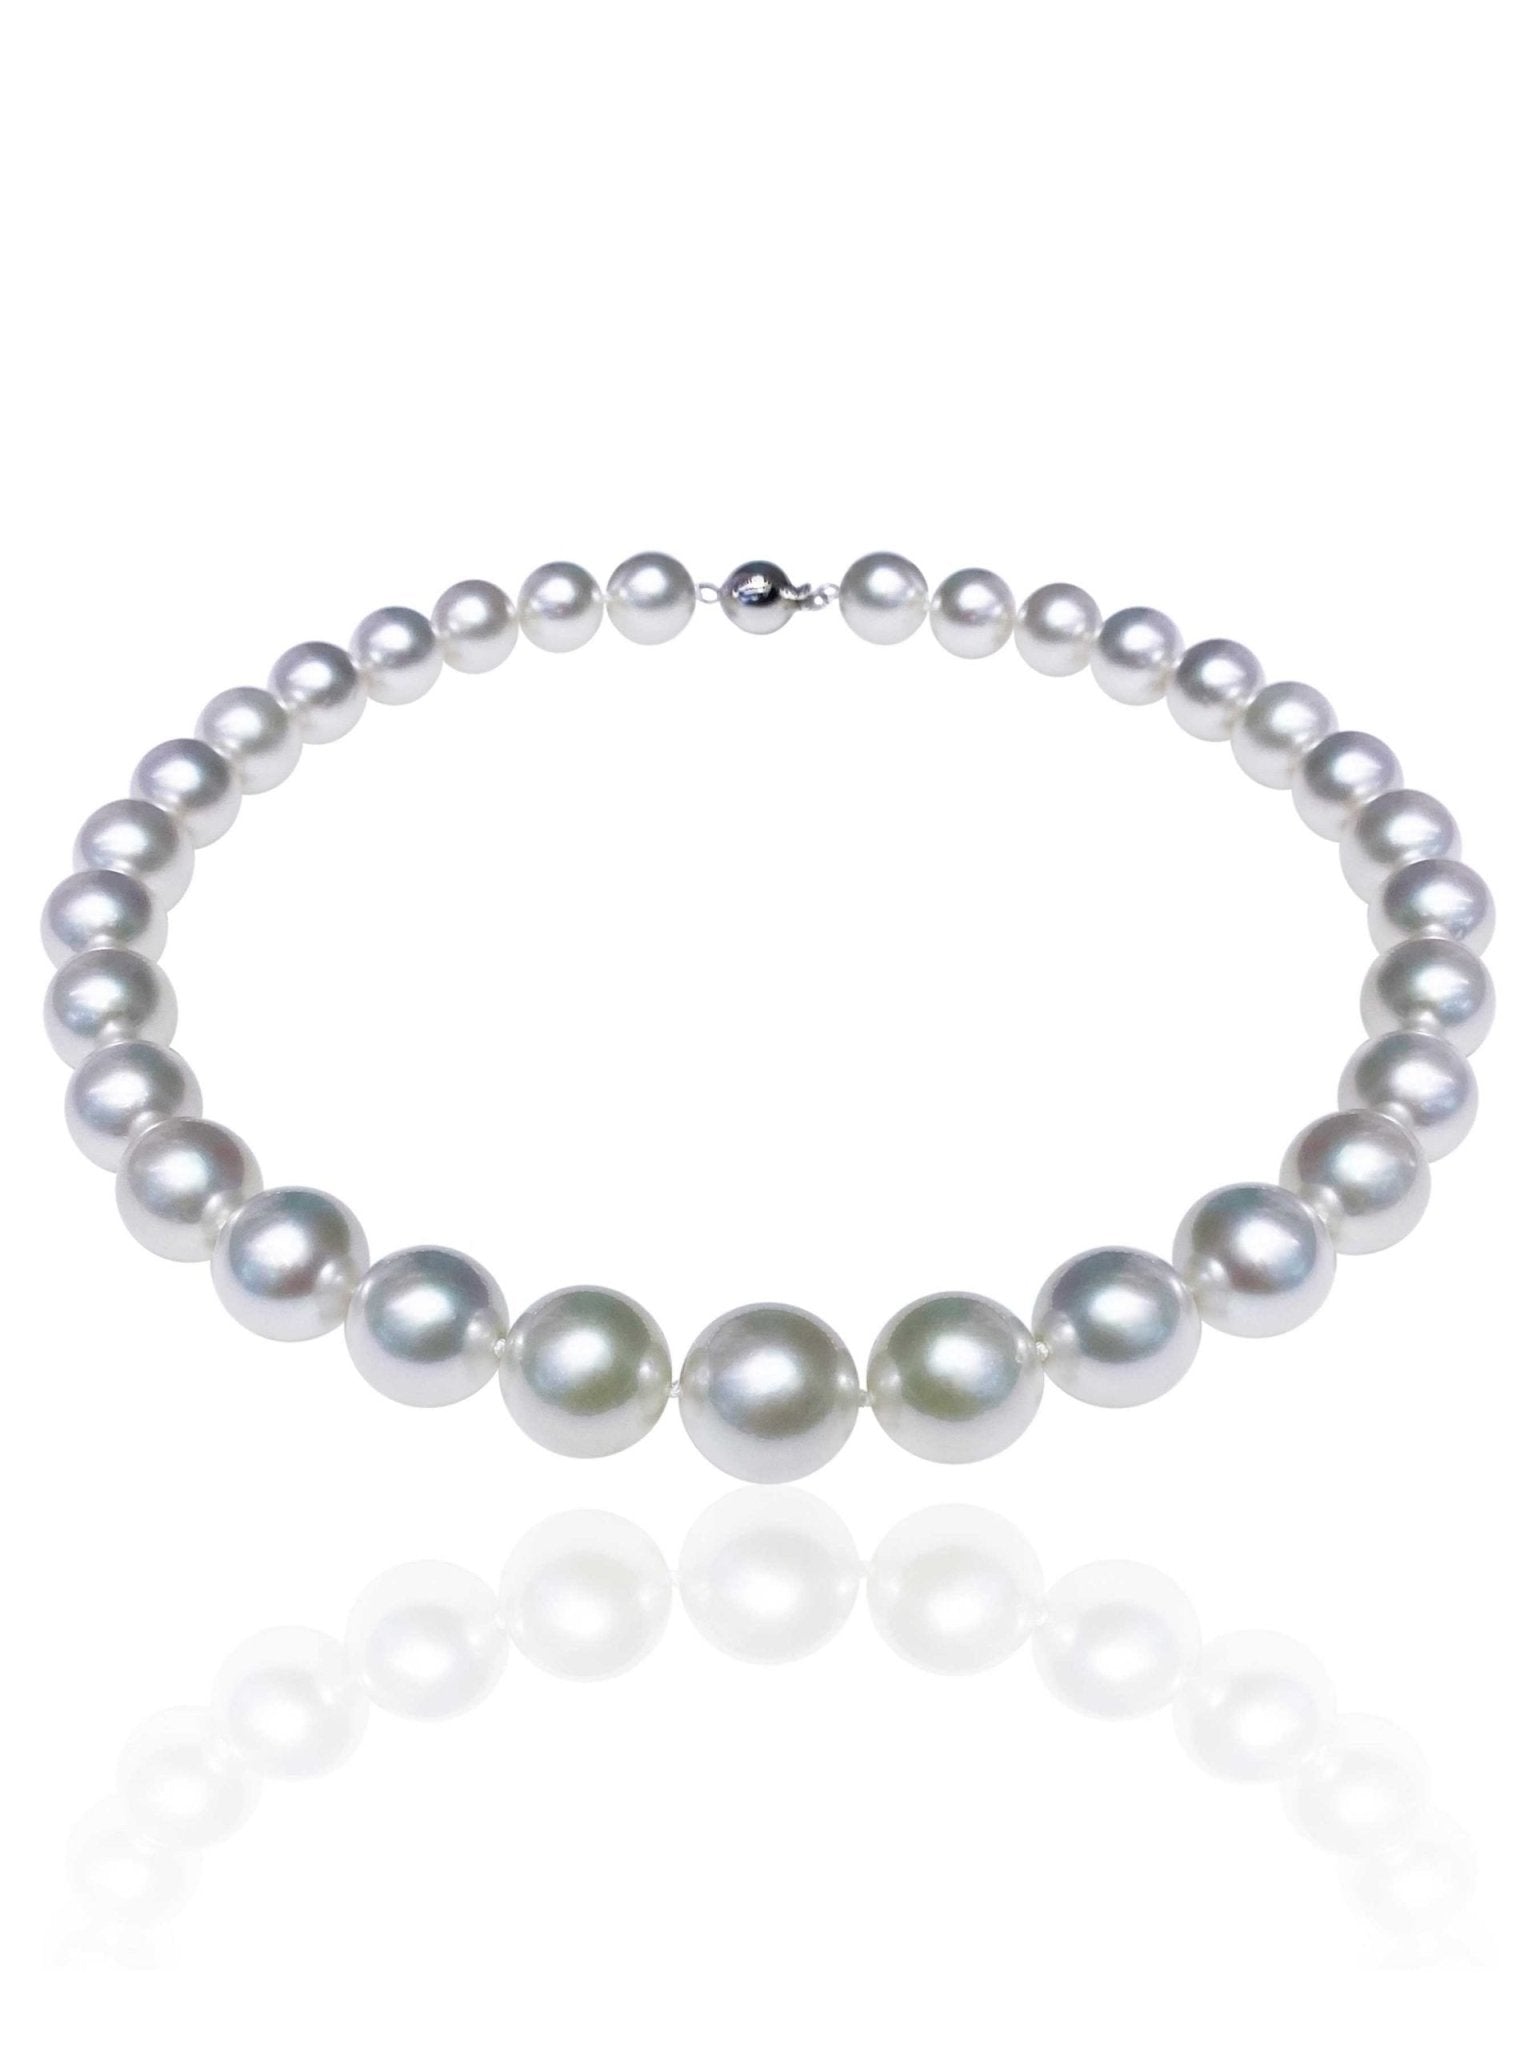 4-12mm Graduated Freshwater Pearl Necklace Bridal Pearls -  Norway